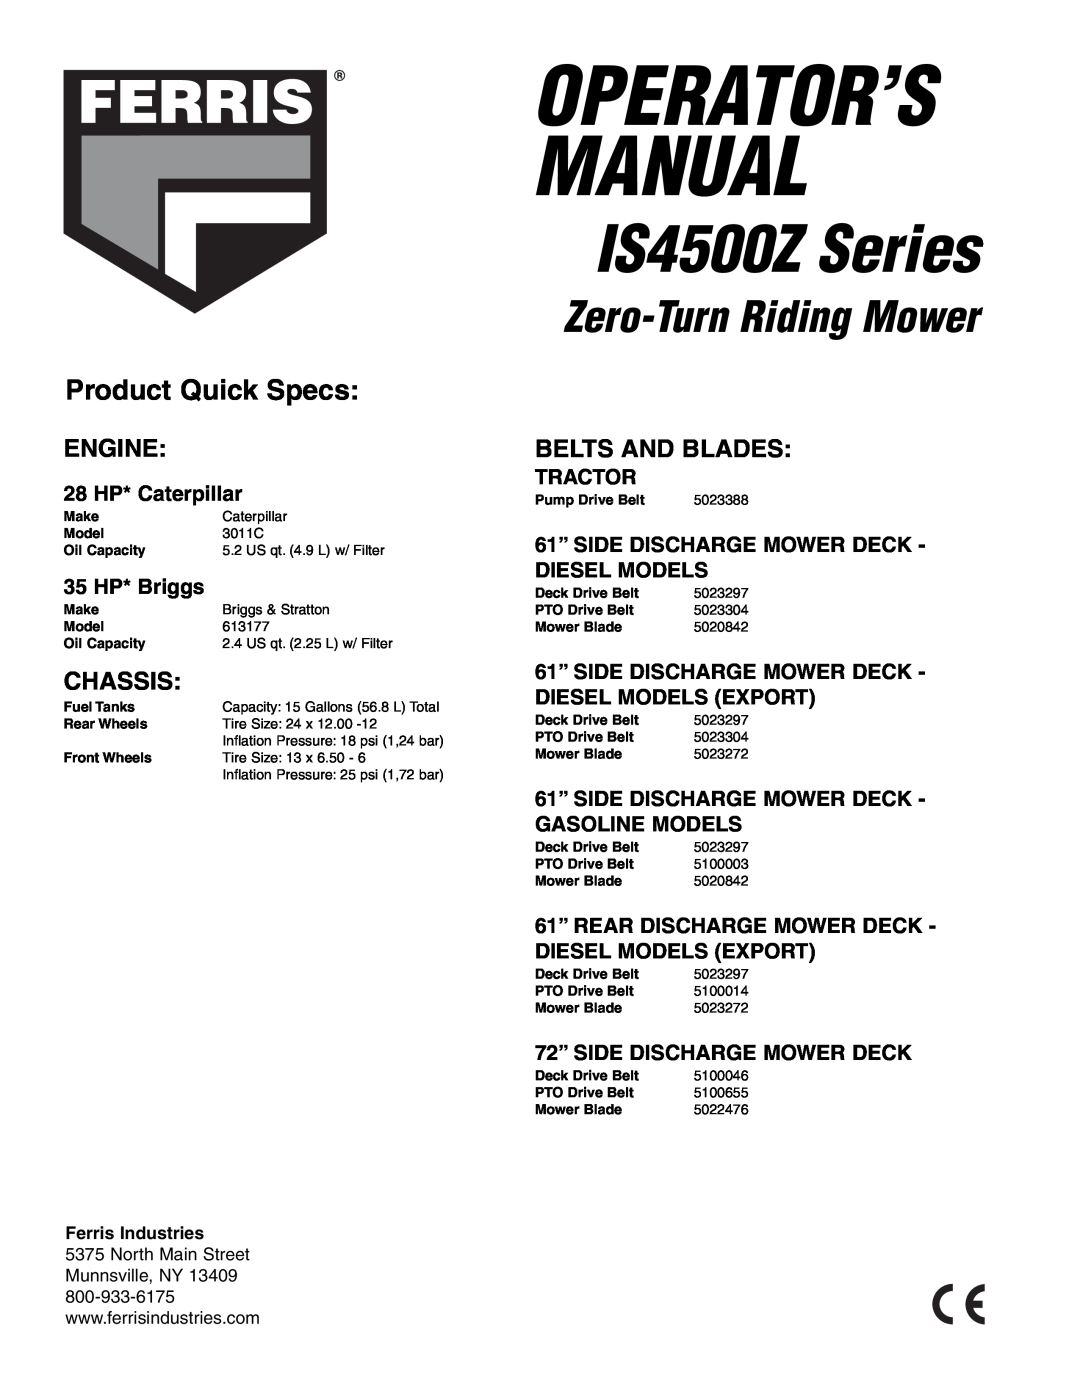 Ferris Industries 5901179 Product Quick Specs, Belts And Blades, IS4500Z Series, Operator’S Manual, Zero-TurnRiding Mower 